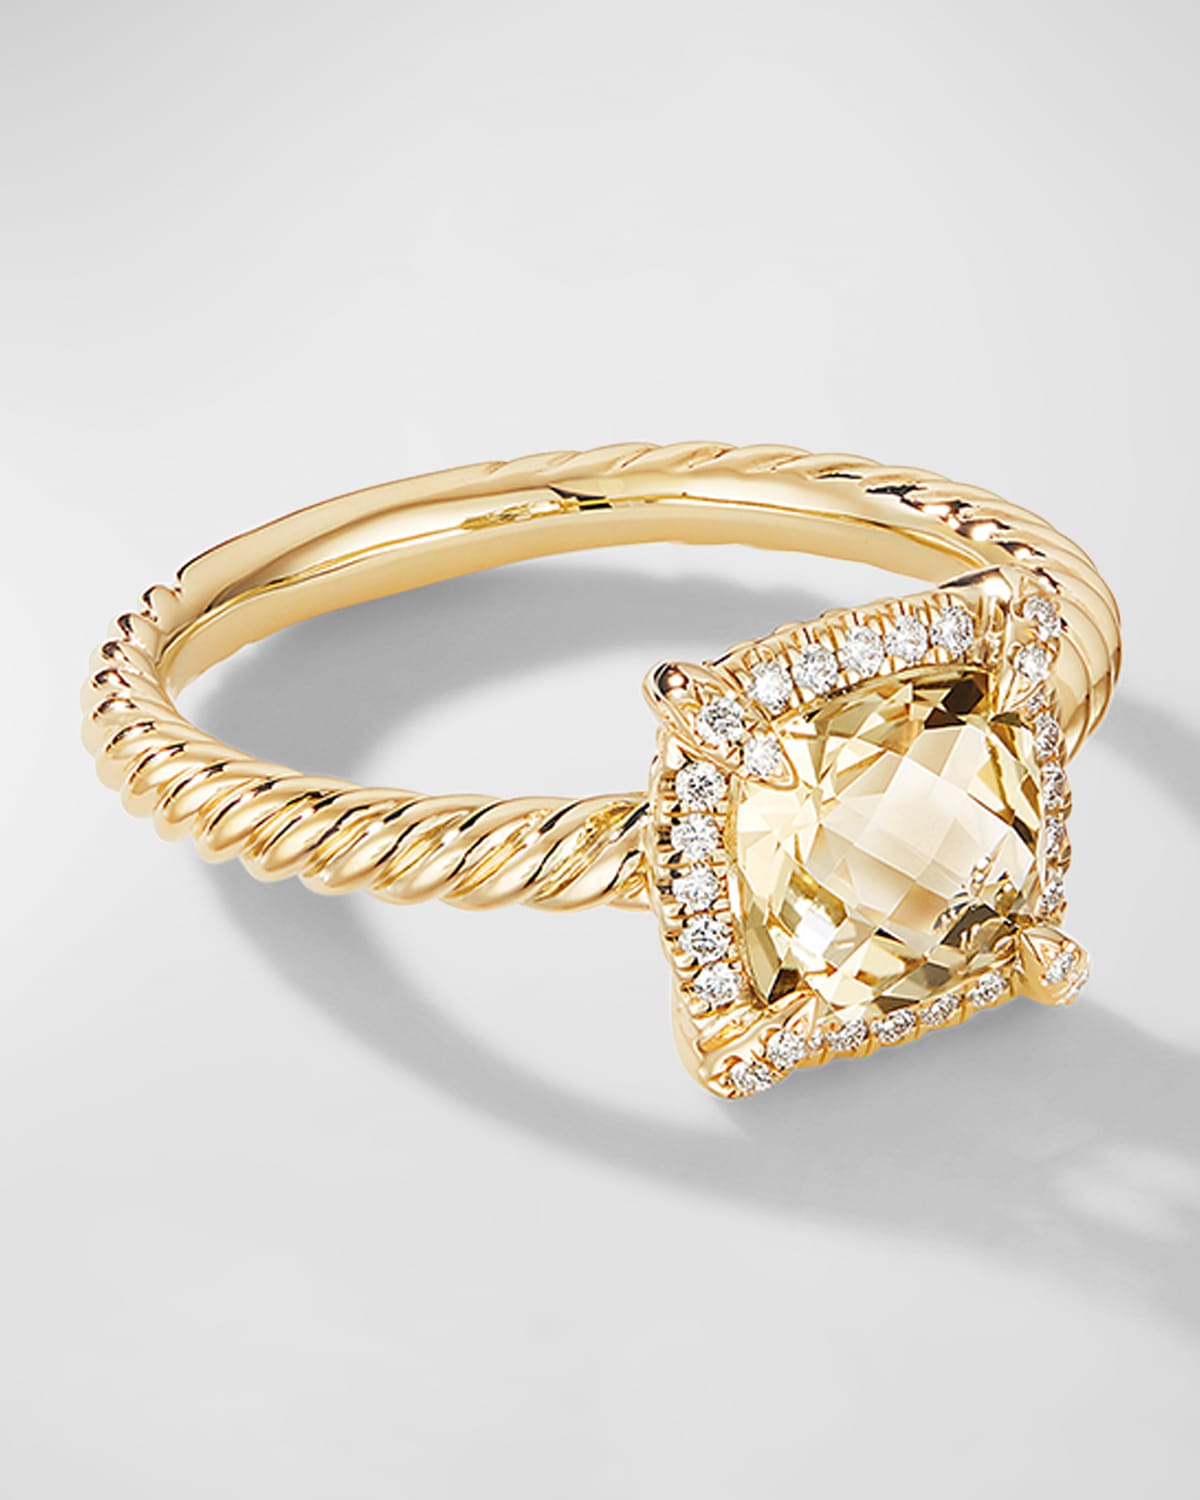 David Yurman Petite Chatelaine Ring With Gemstone And Diamonds In 18k Gold, 7mm In Champagne Citrine